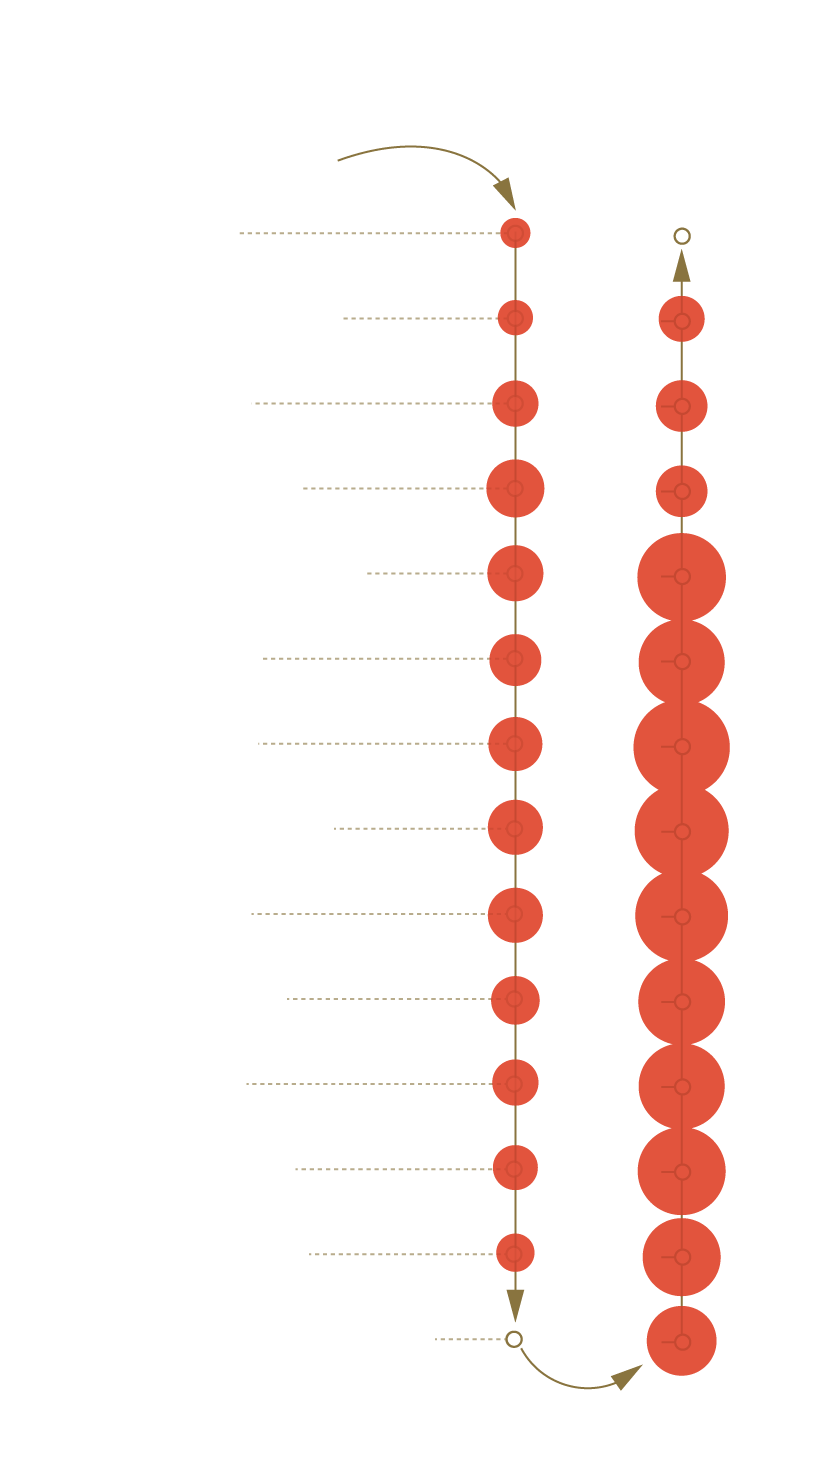 Diagram of the B Line stops with reported counts of people from the Union Station through North Hollywood and back.